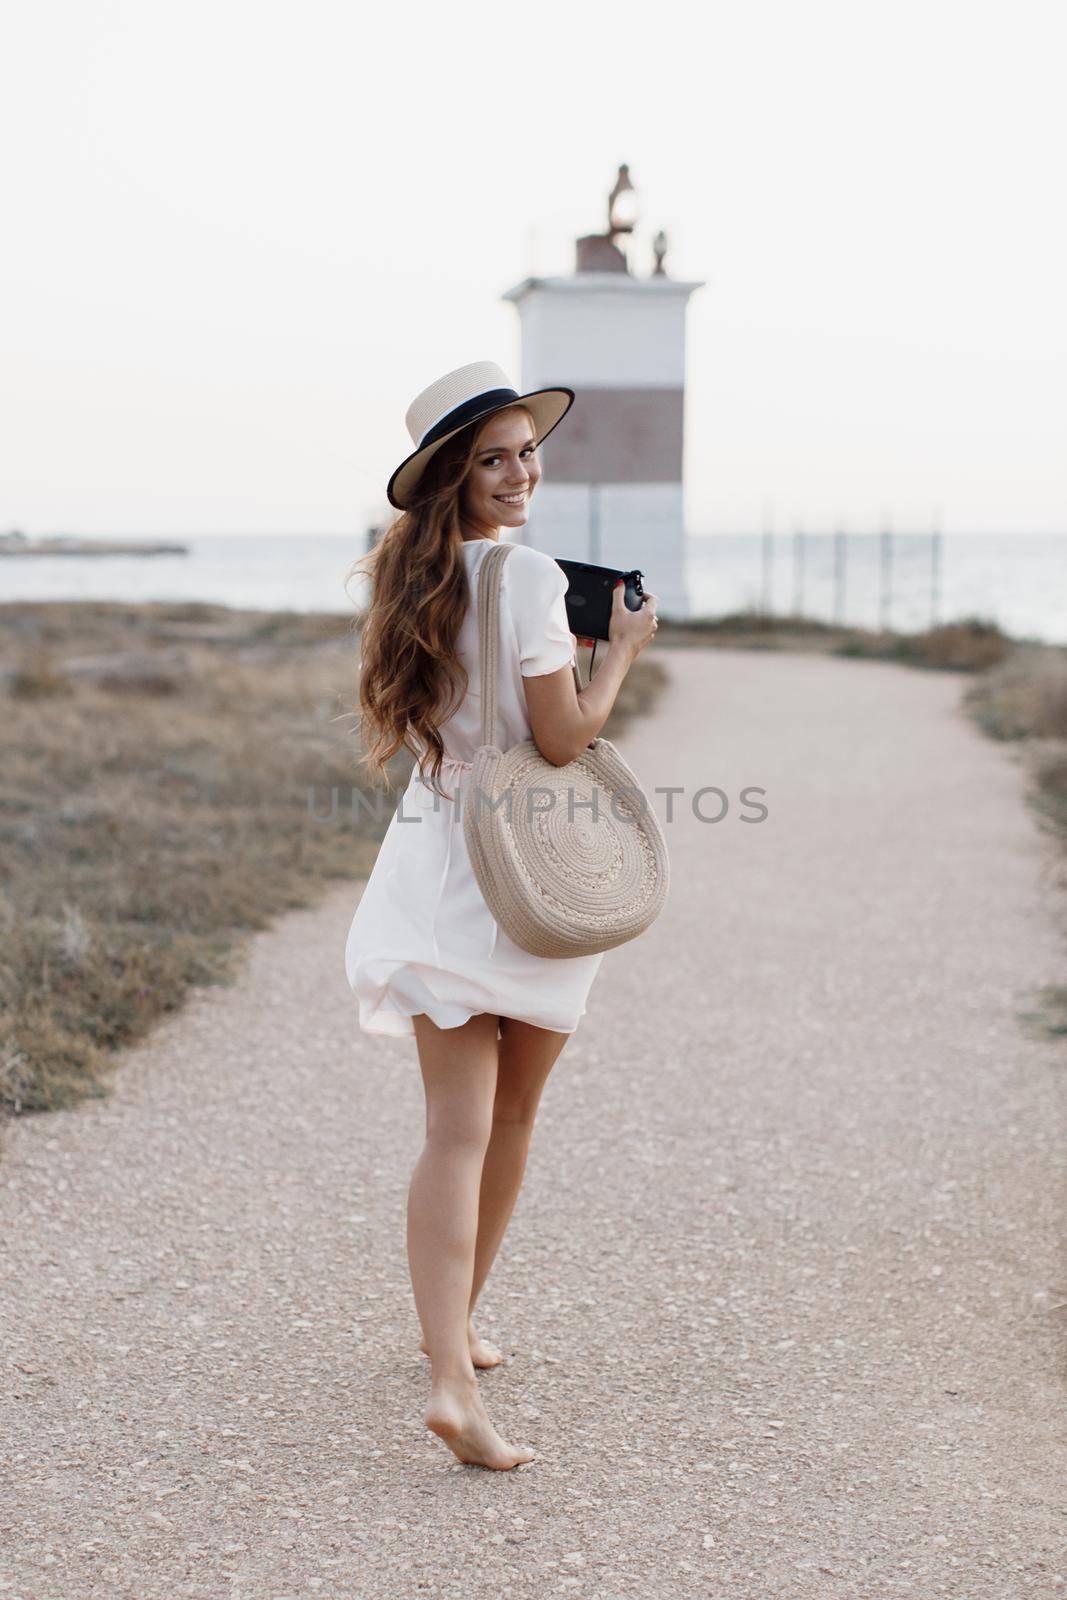 happy young woman with camera outdoor by splash